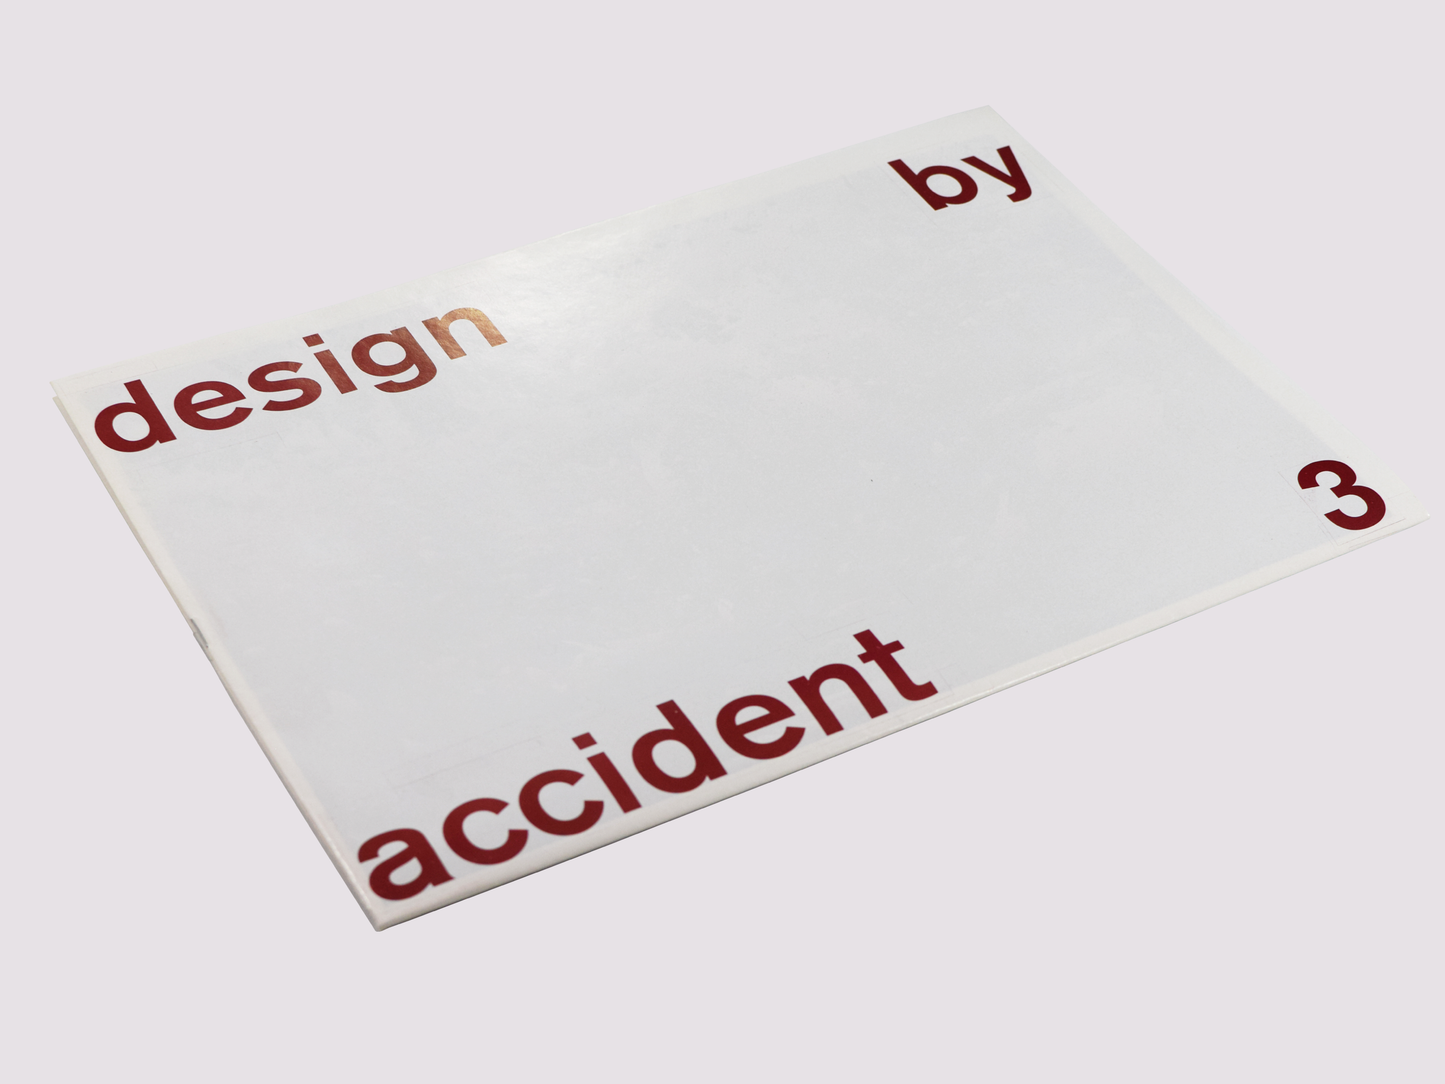 Design by Accident published by Highchair ECAL